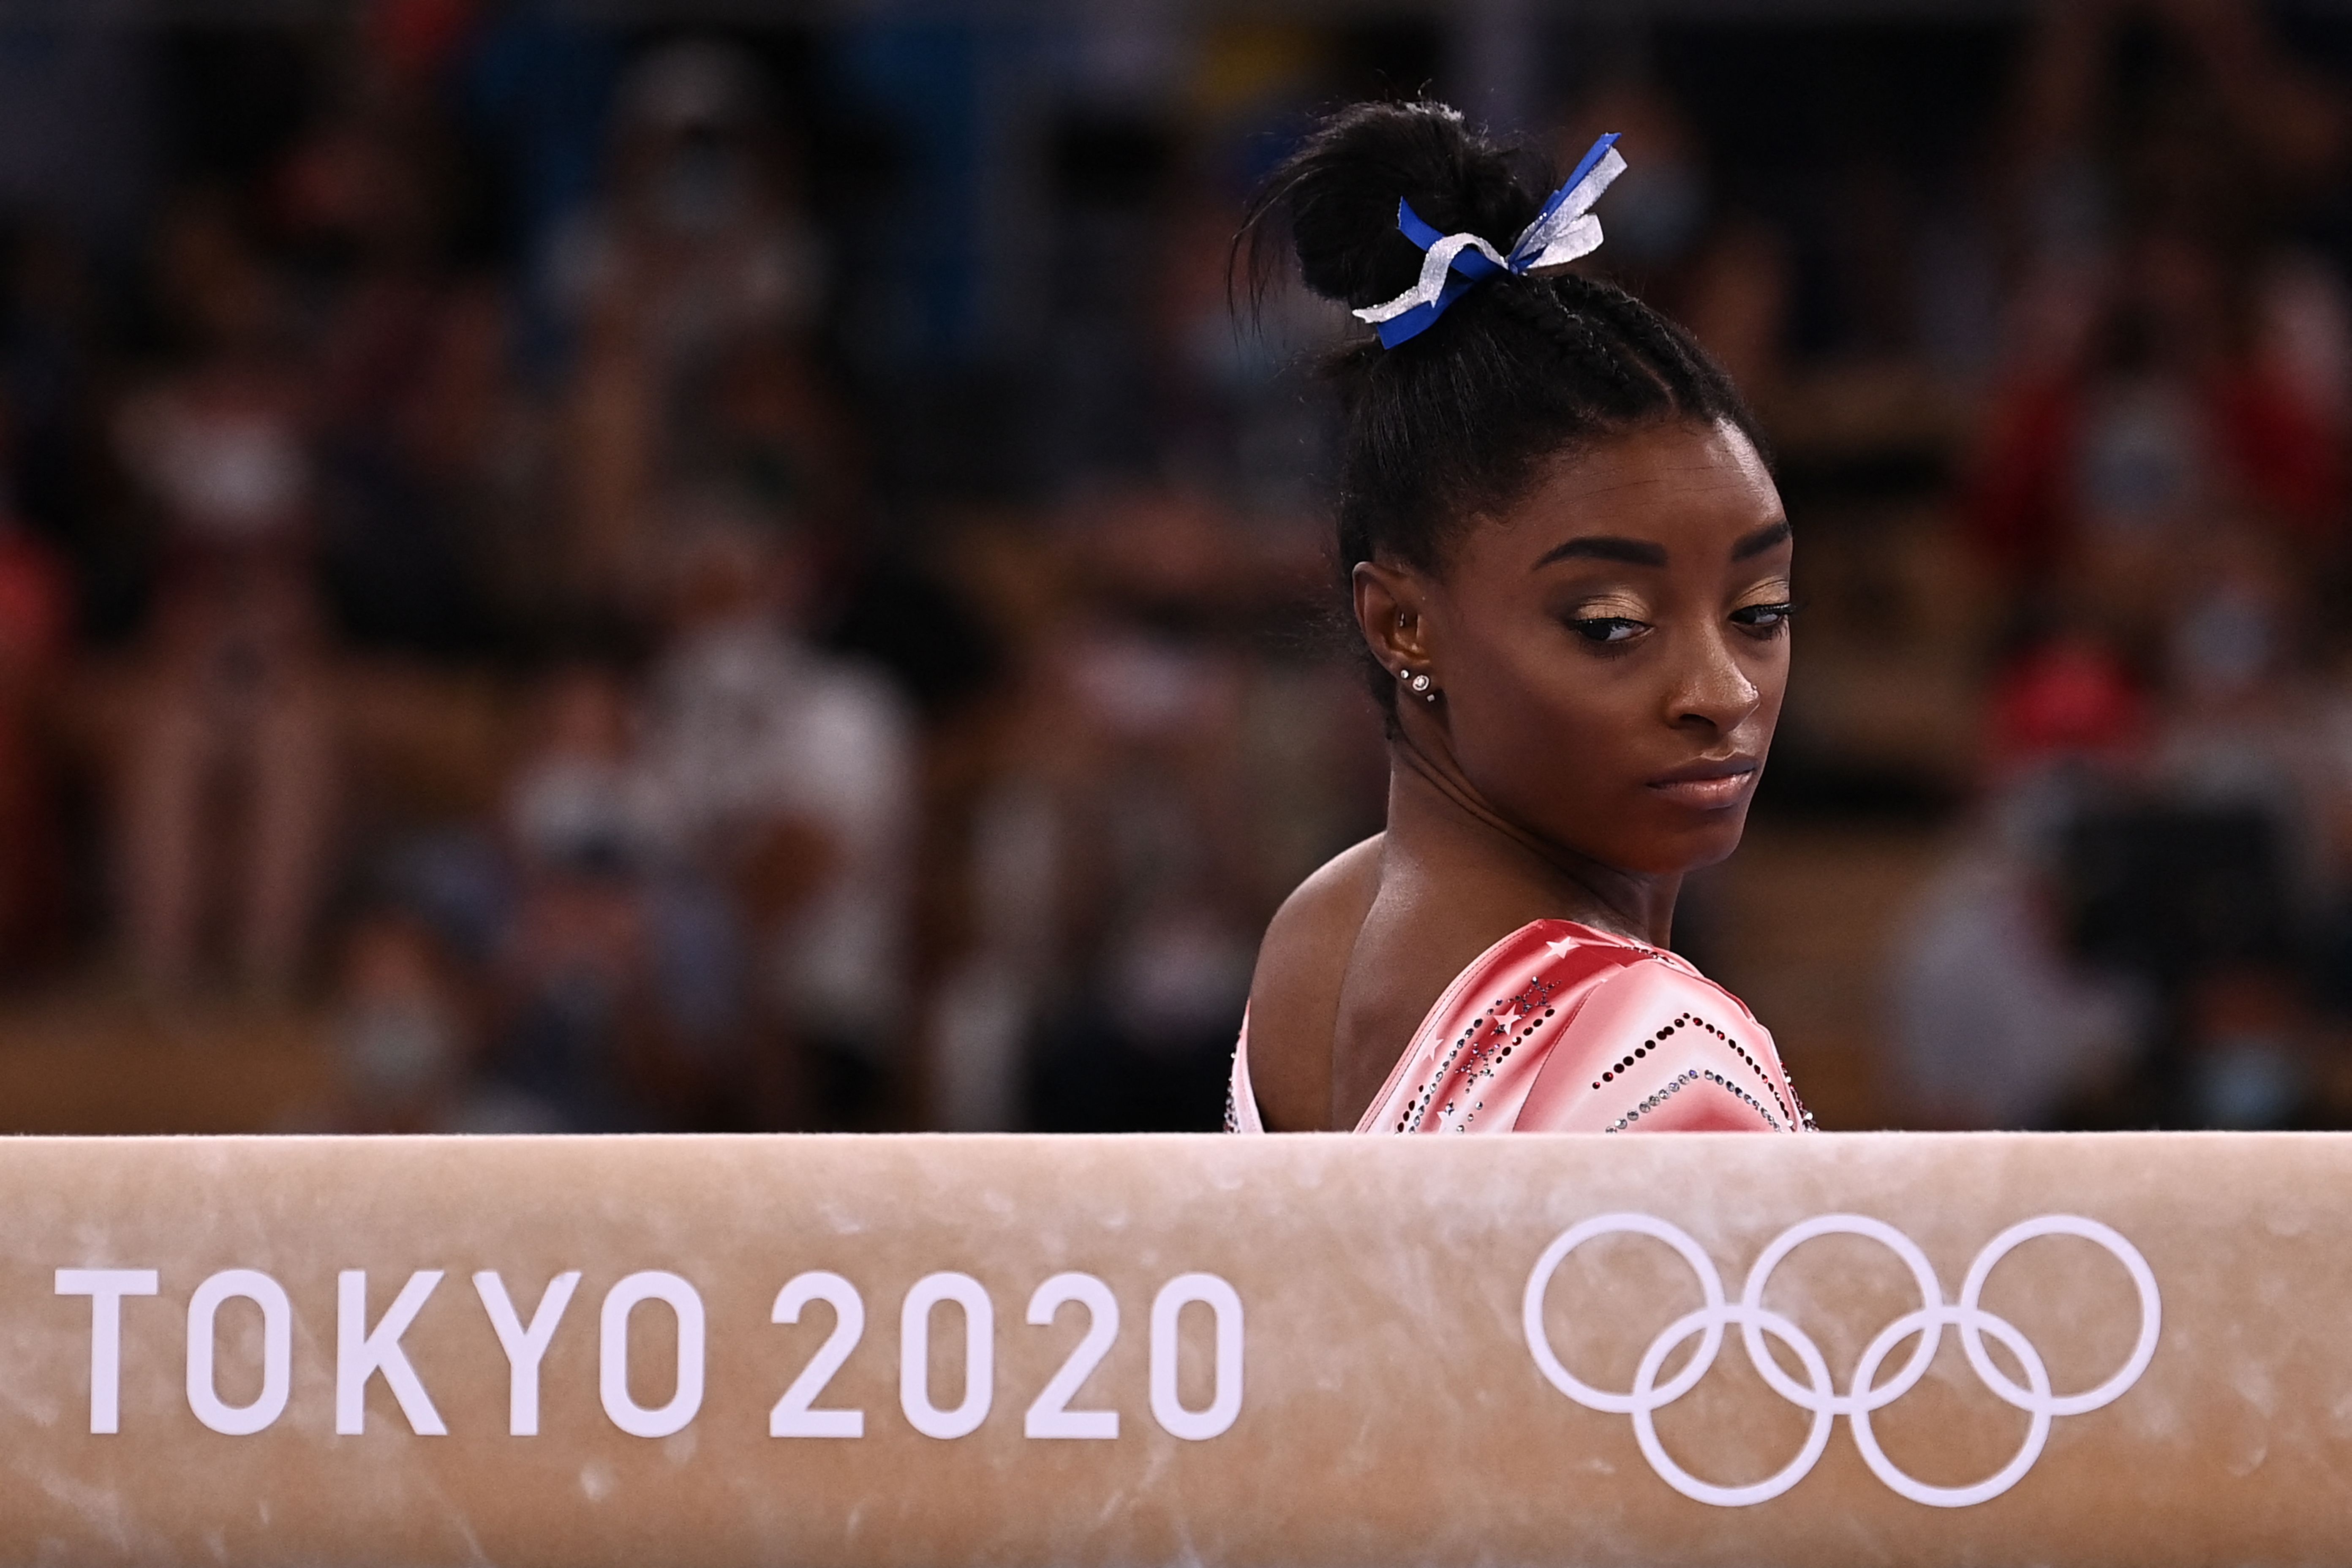 Simone Biles gets ready to compete in the artistic gymnastics women's balance beam final of the Tokyo 2020 Olympic Games, at Ariake Gymnastics Centre, in Tokyo, on August 3, 2021. | Source: Getty Images